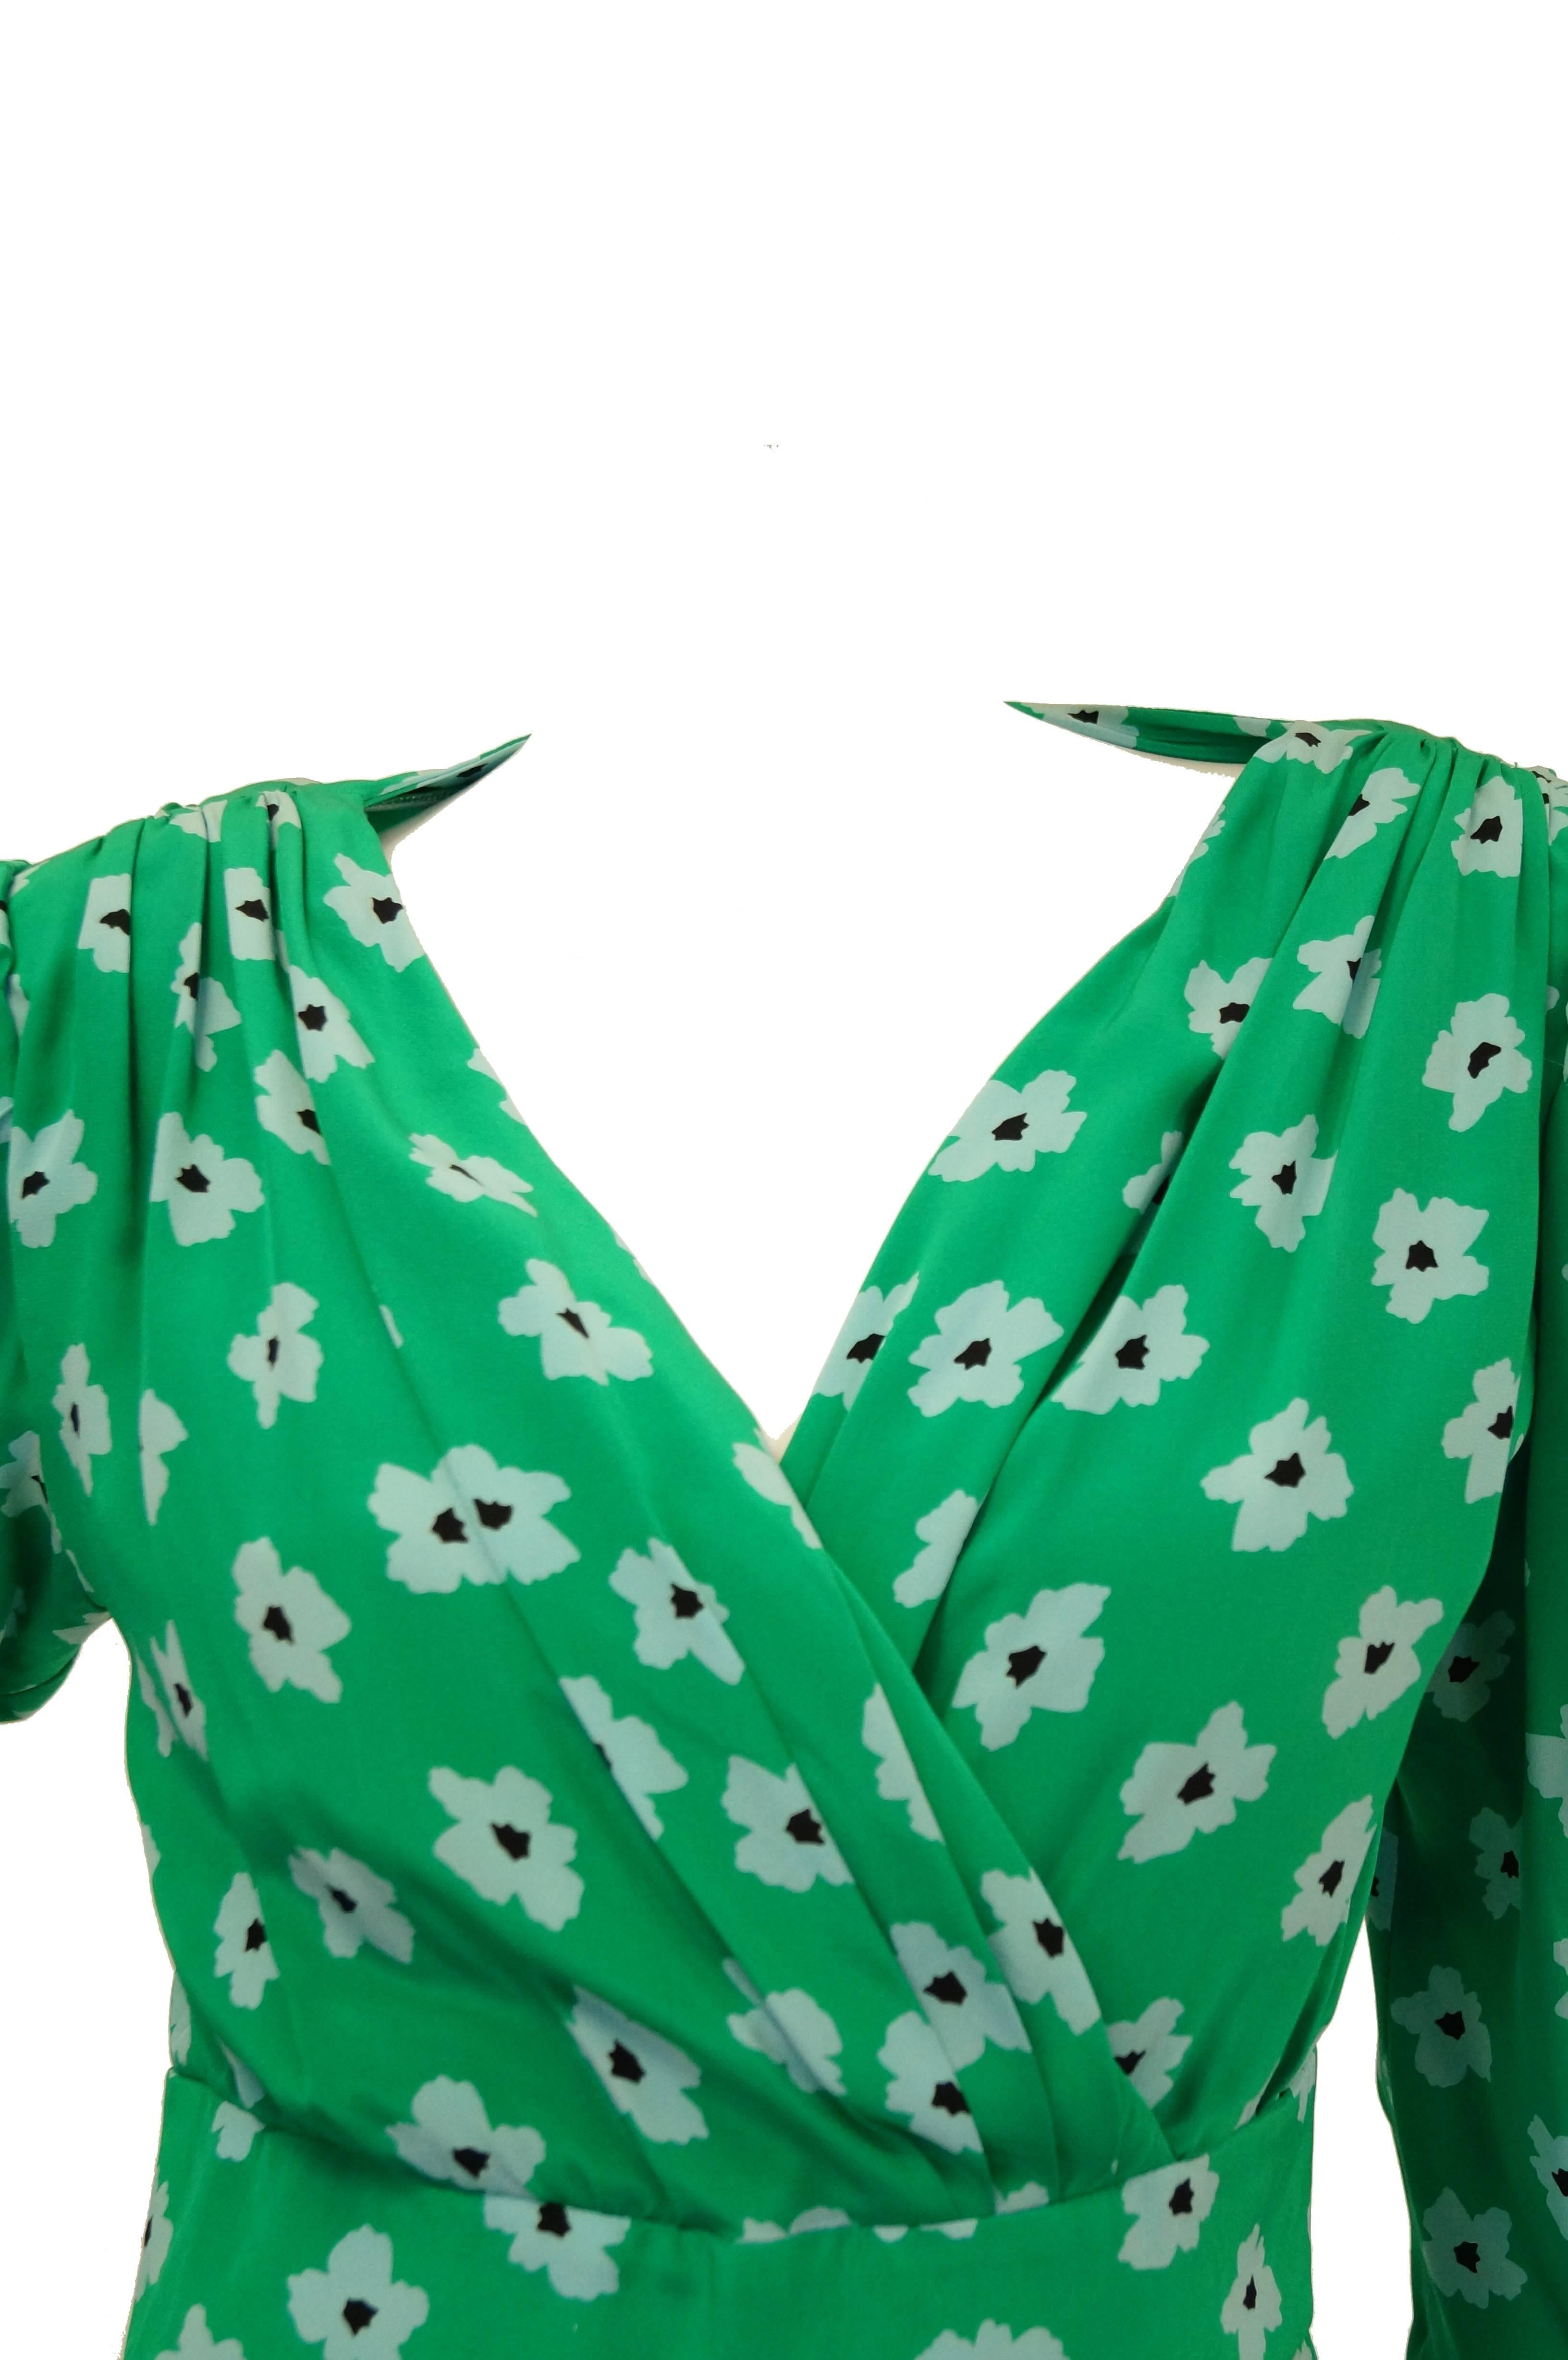 1980s green with white flowers silk dress by Nina Ricci. The dress is knee length with 3/4 length sleeves, and a V - neck surpliced neckline created by the faux wrap drape closure of the dress. The dress has structured shoulders and a tulip skirt.